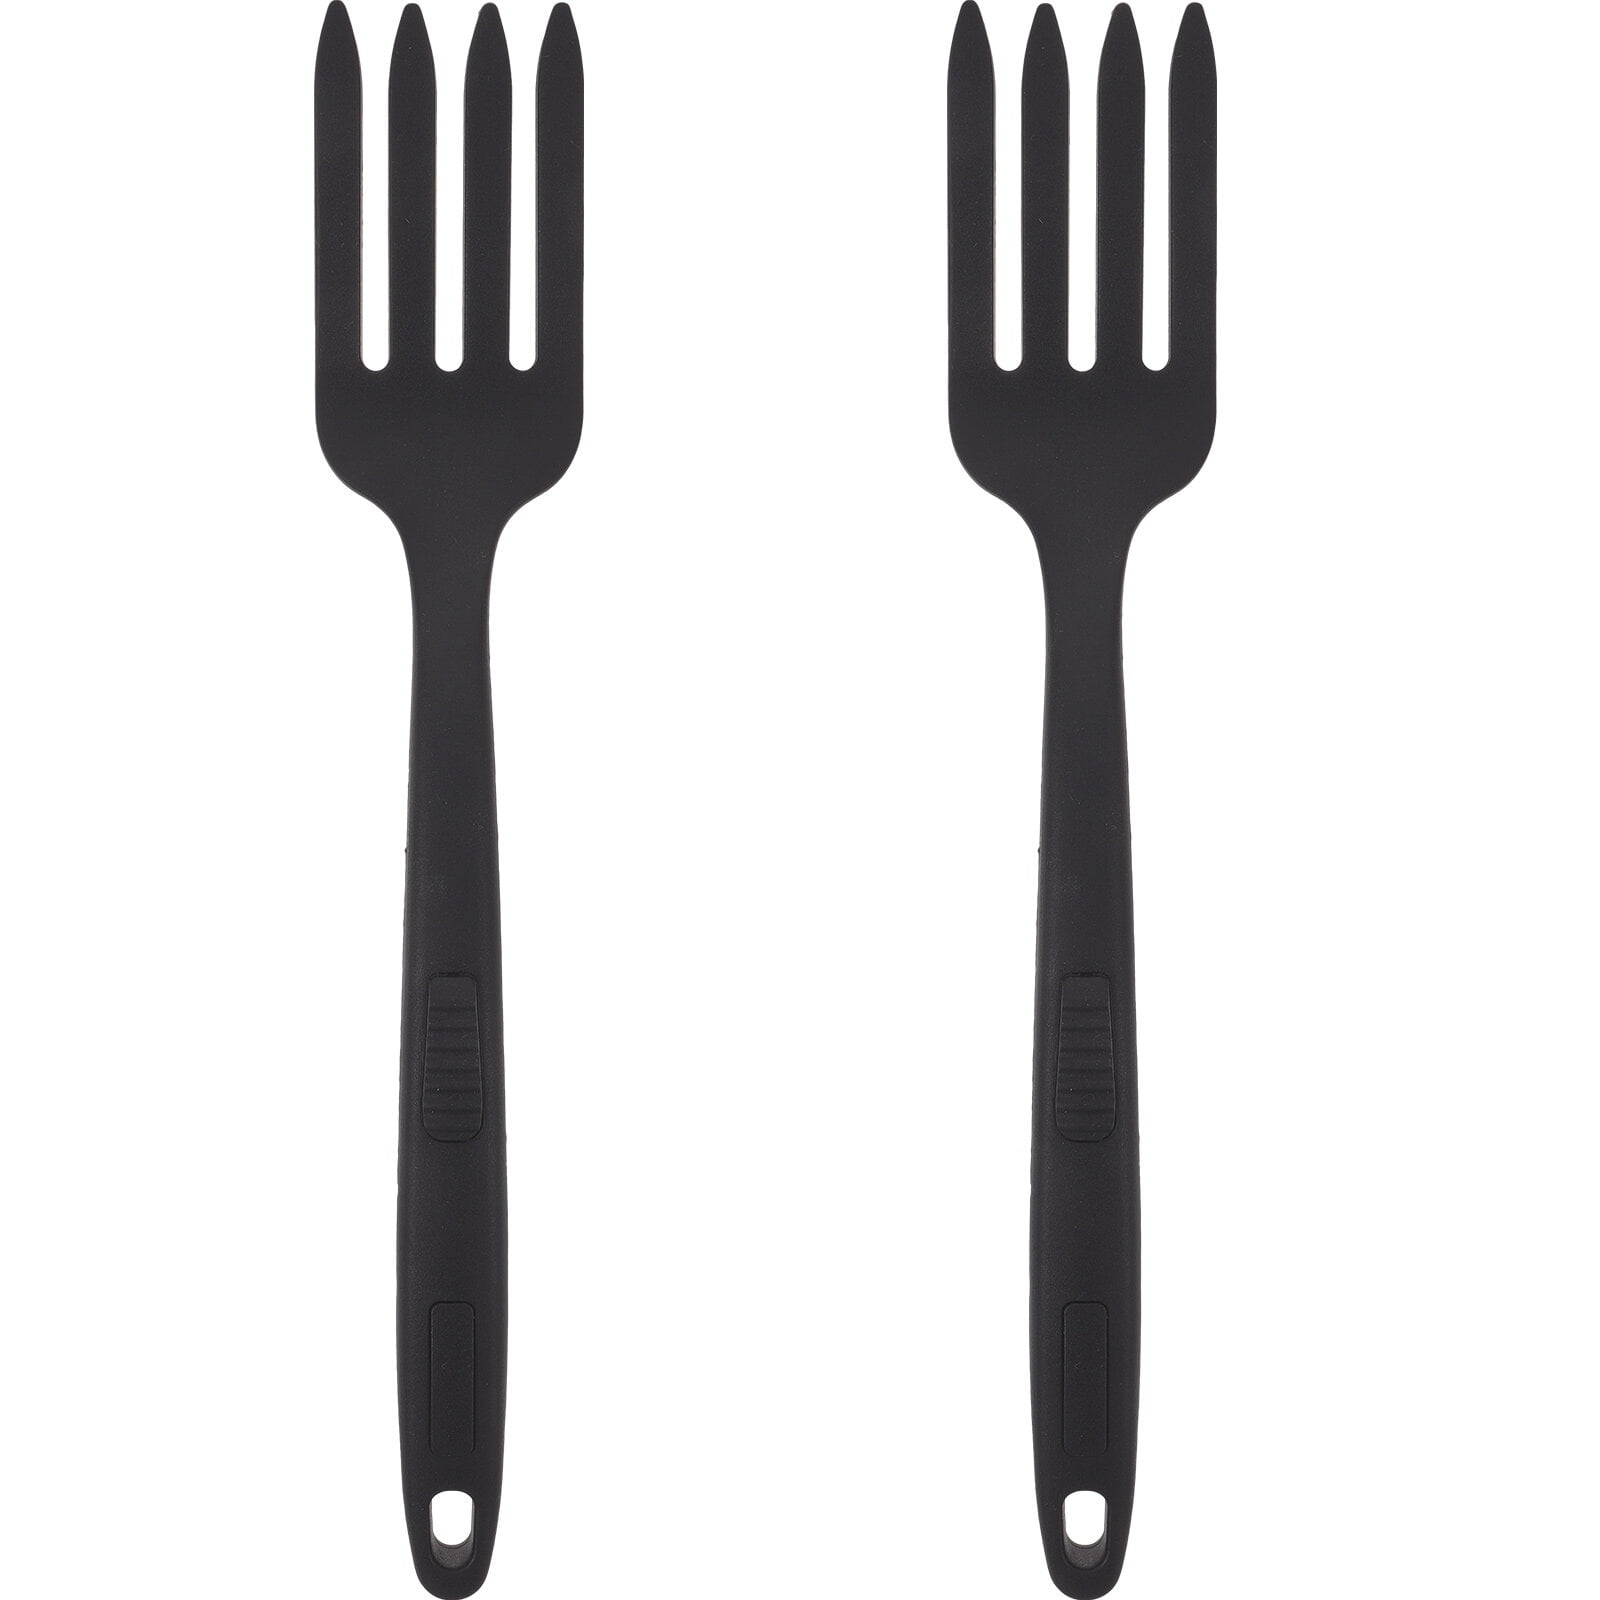  WISELADY Integral Forming of Silicone Pasta Fork